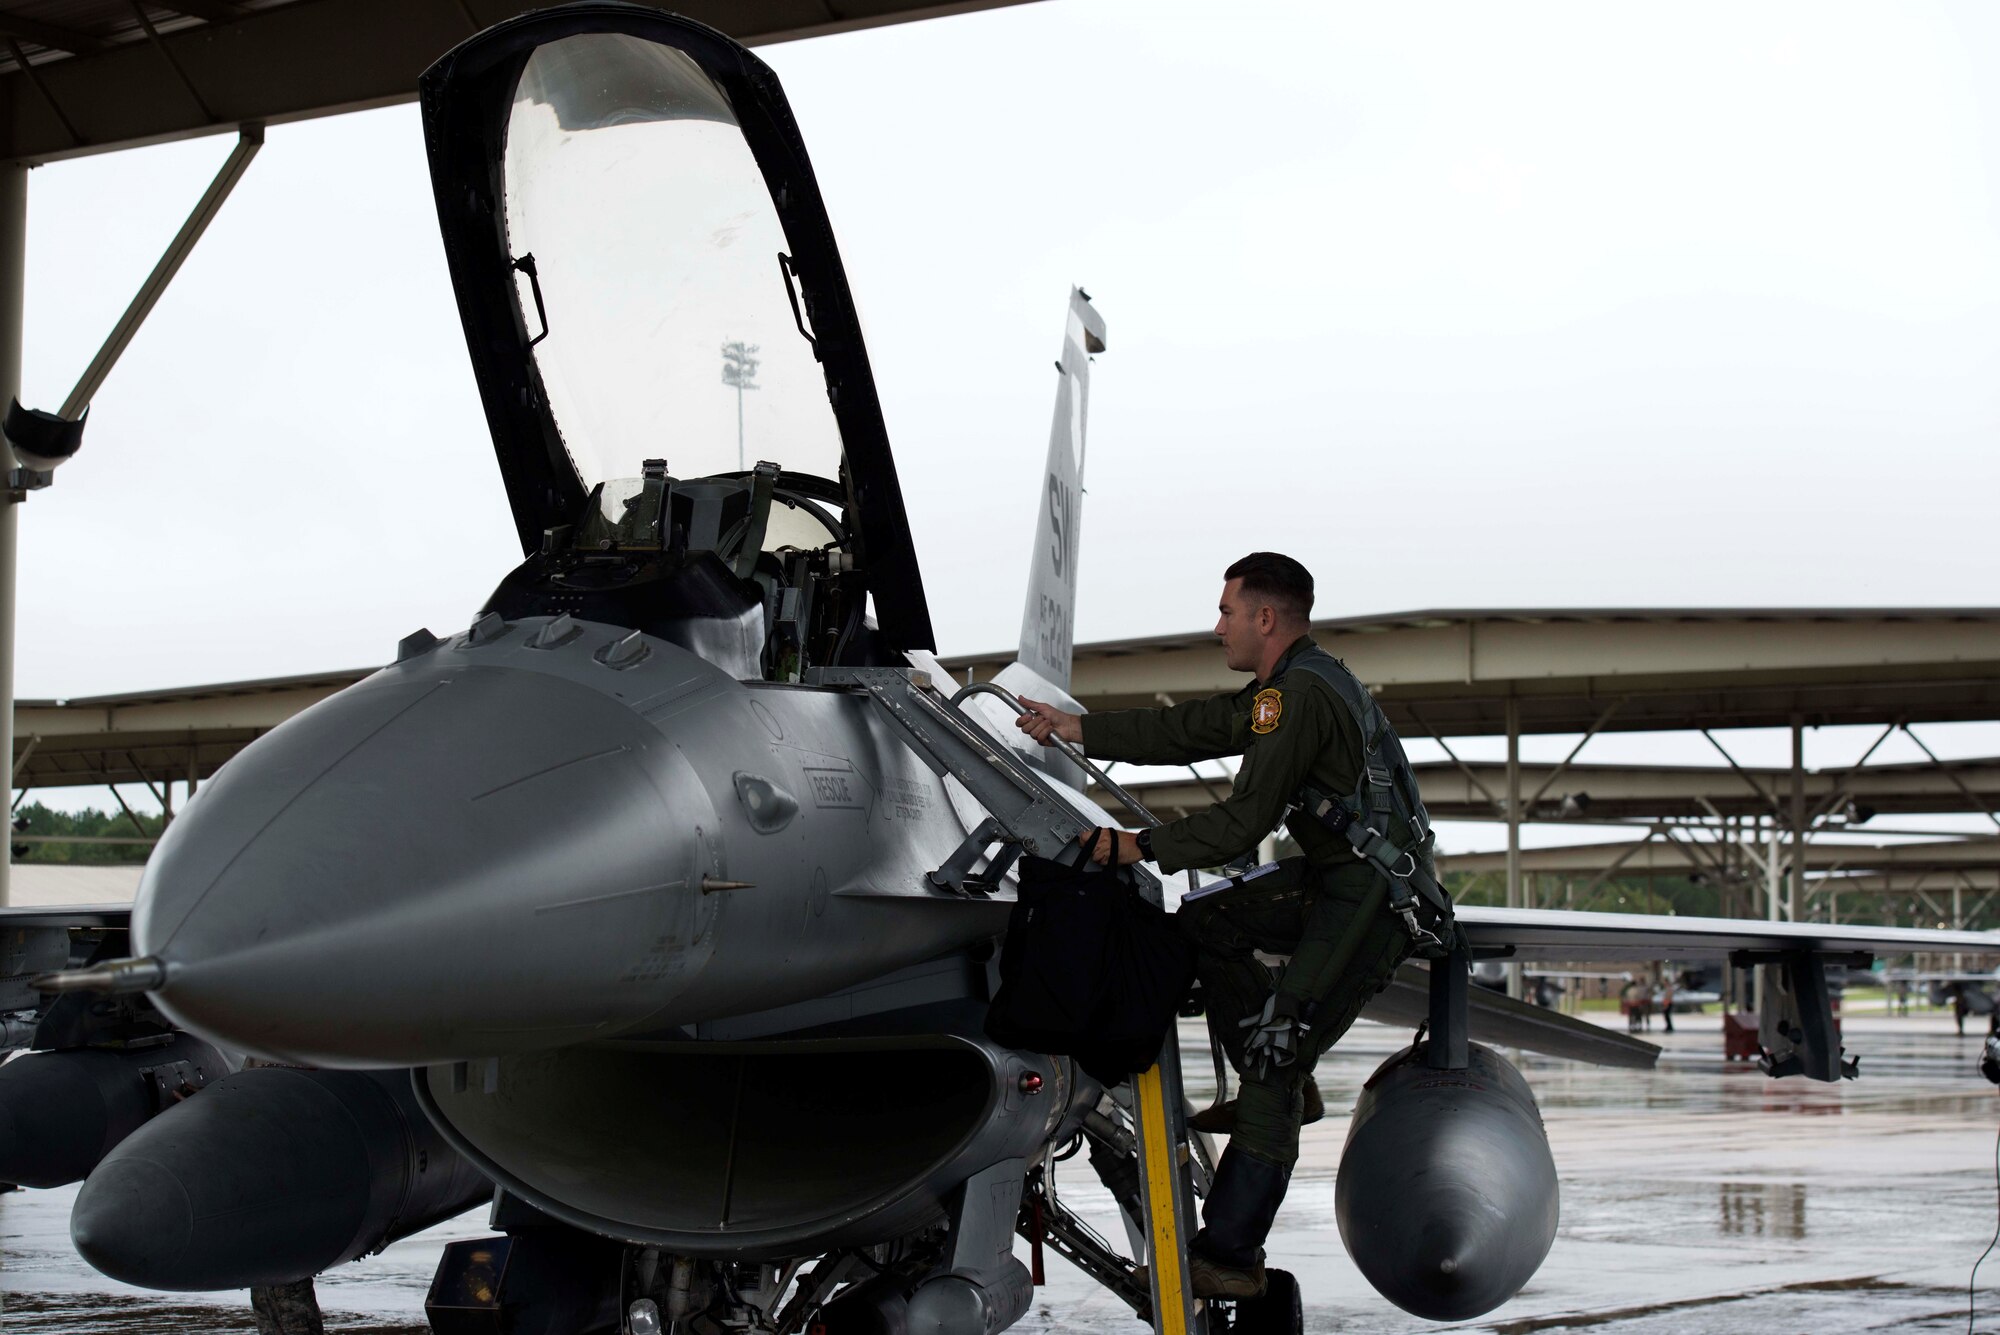 A U.S. Air Force pilot assigned to the 79th Fighter Squadron (FS) climbs into an F-16 Fighting Falcon at Shaw Air Force Base, S.C., Oct. 10, 2018.